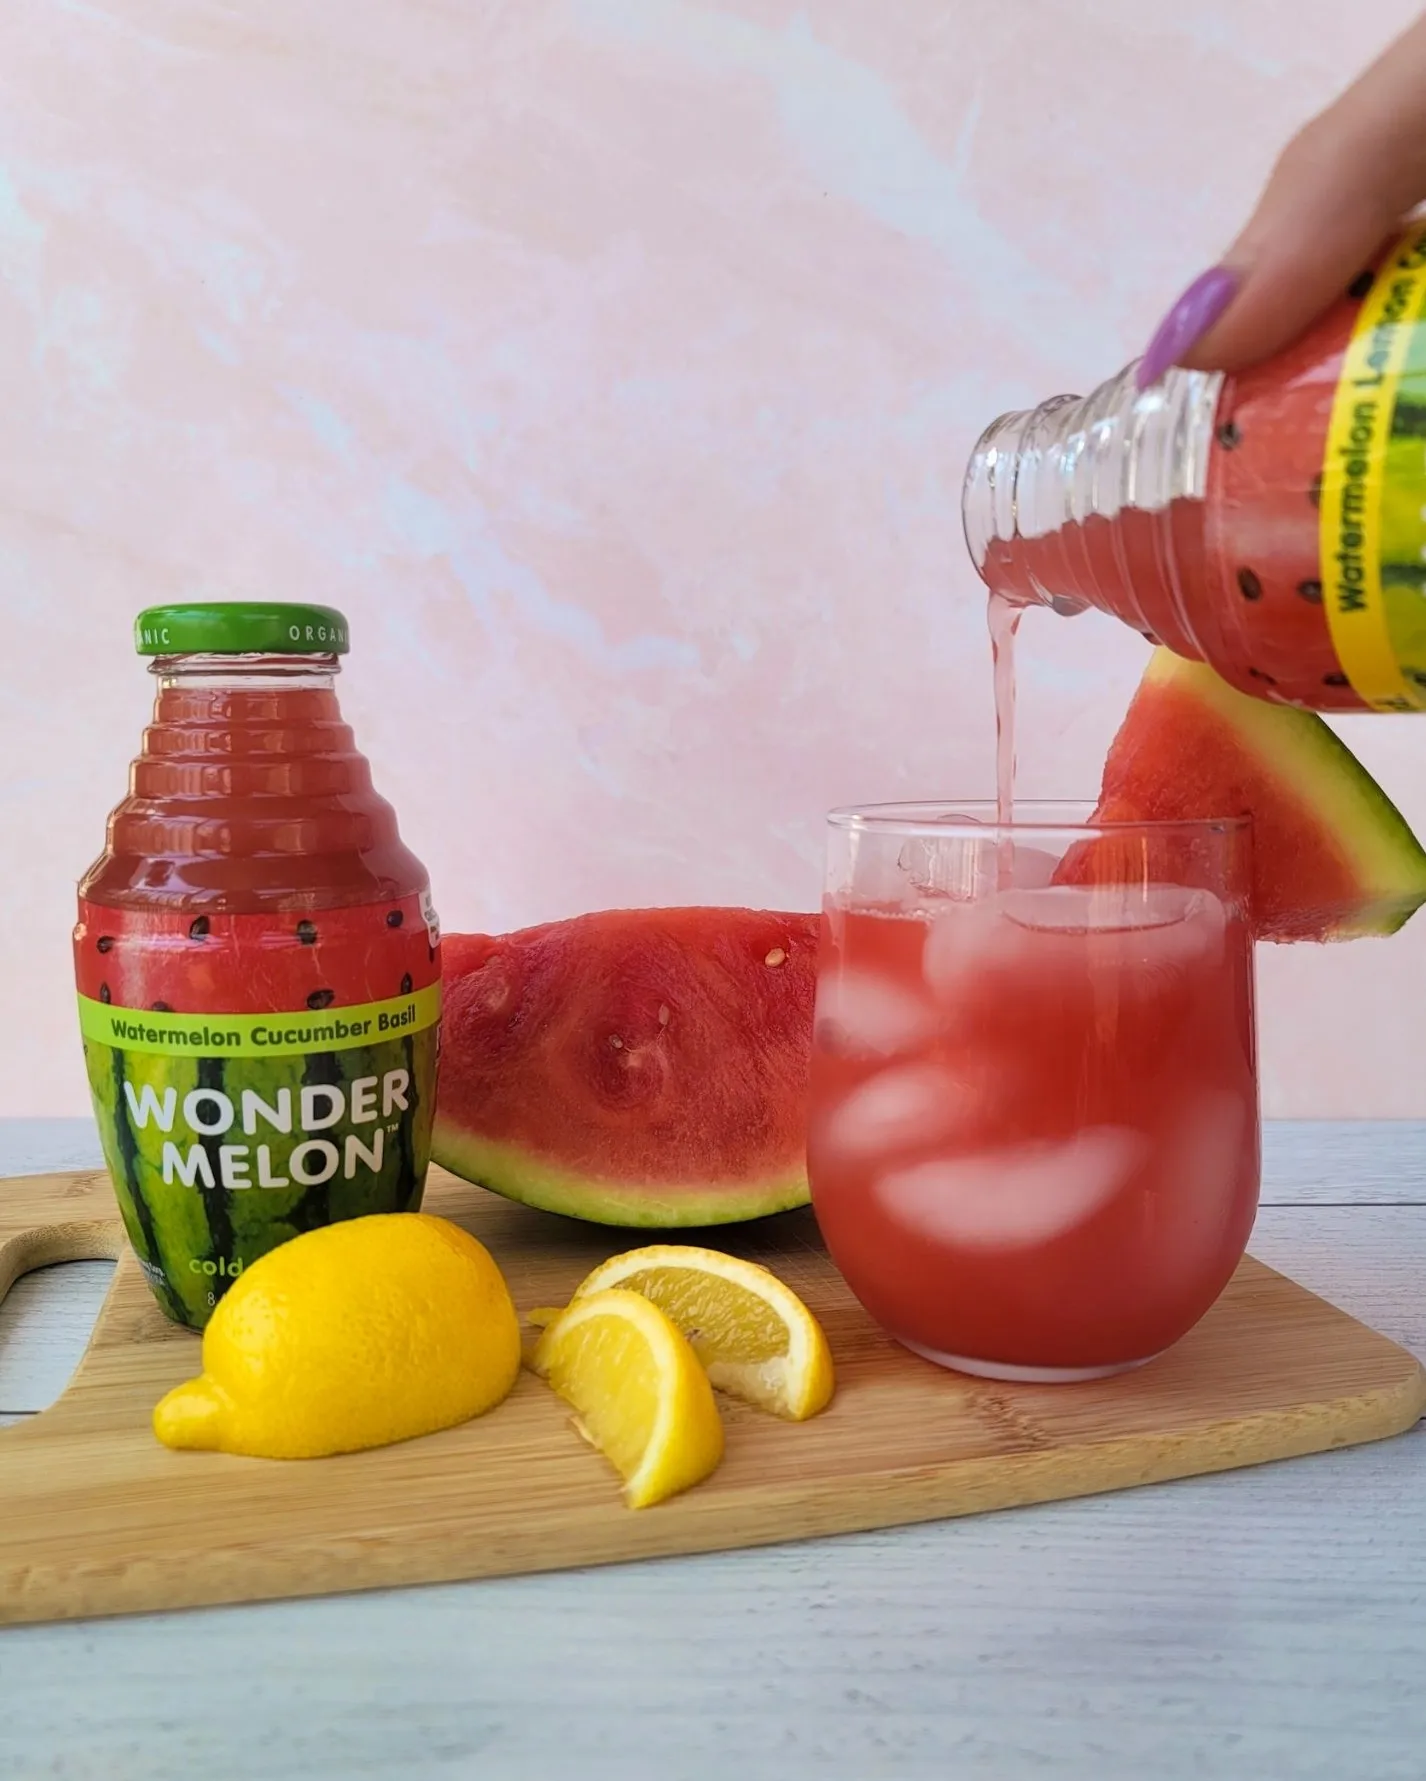 Wonder Melon Juice being poured in a glass.